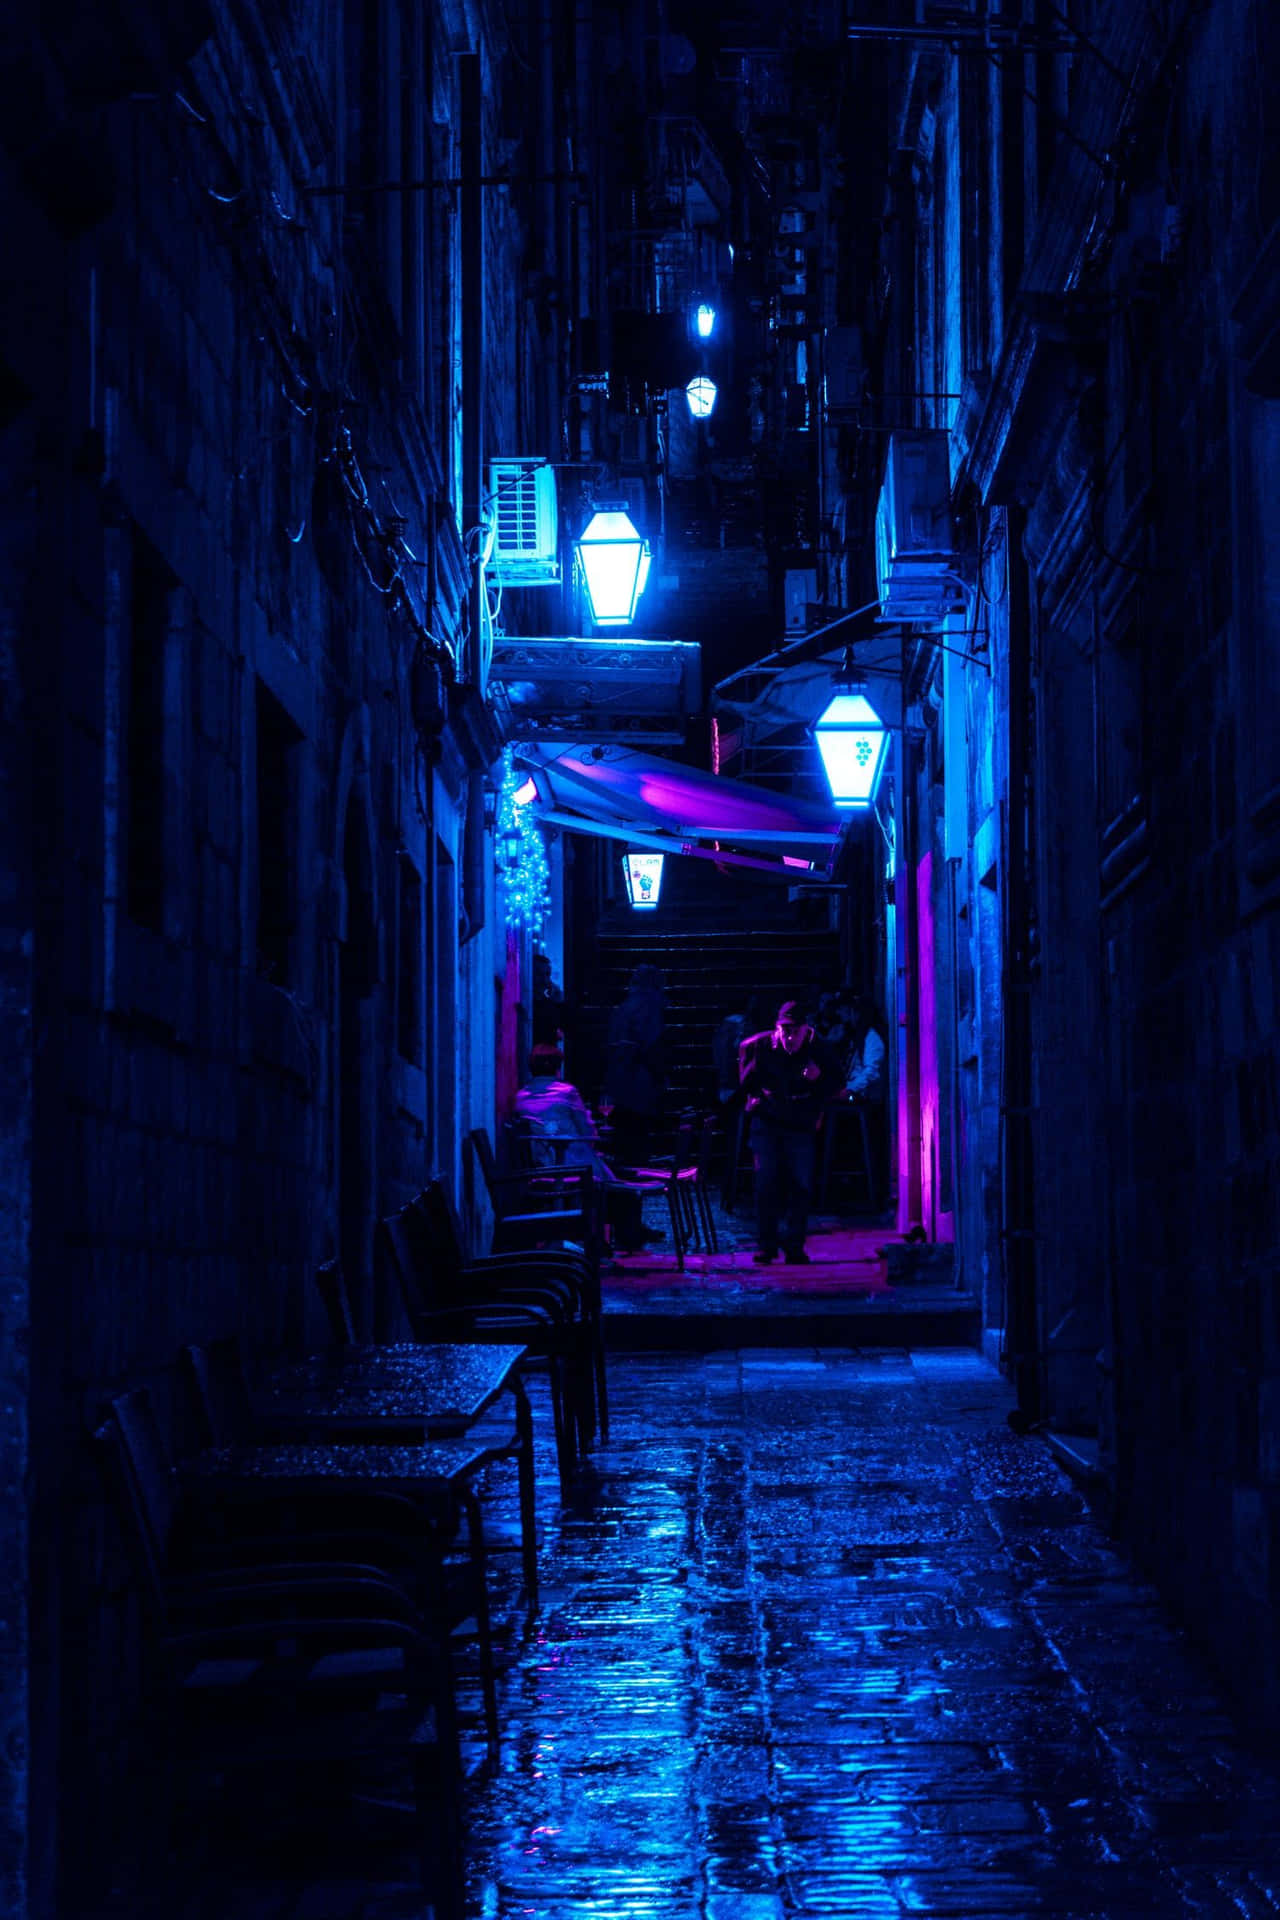 Enjoy the unique beauty of an Alleyway